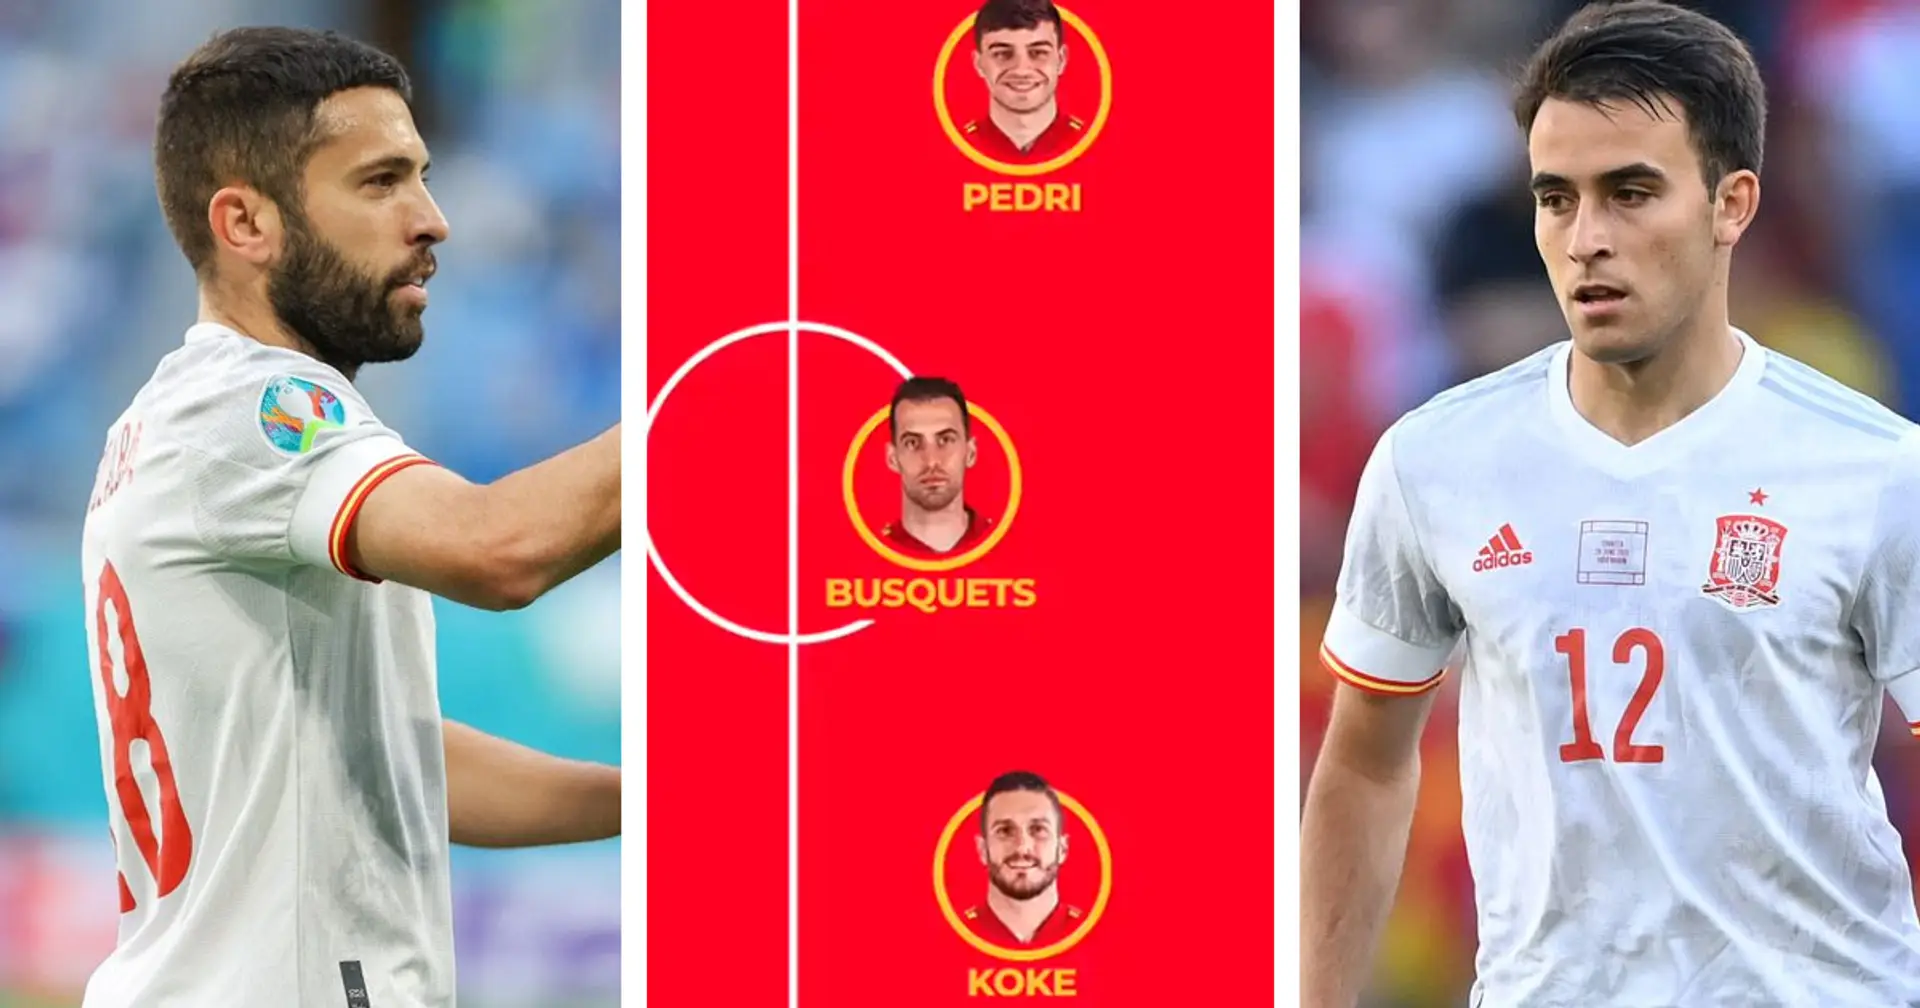 All 4 Blaugranas set to start for Spain in Euro 2020 semi-finals vs Italy